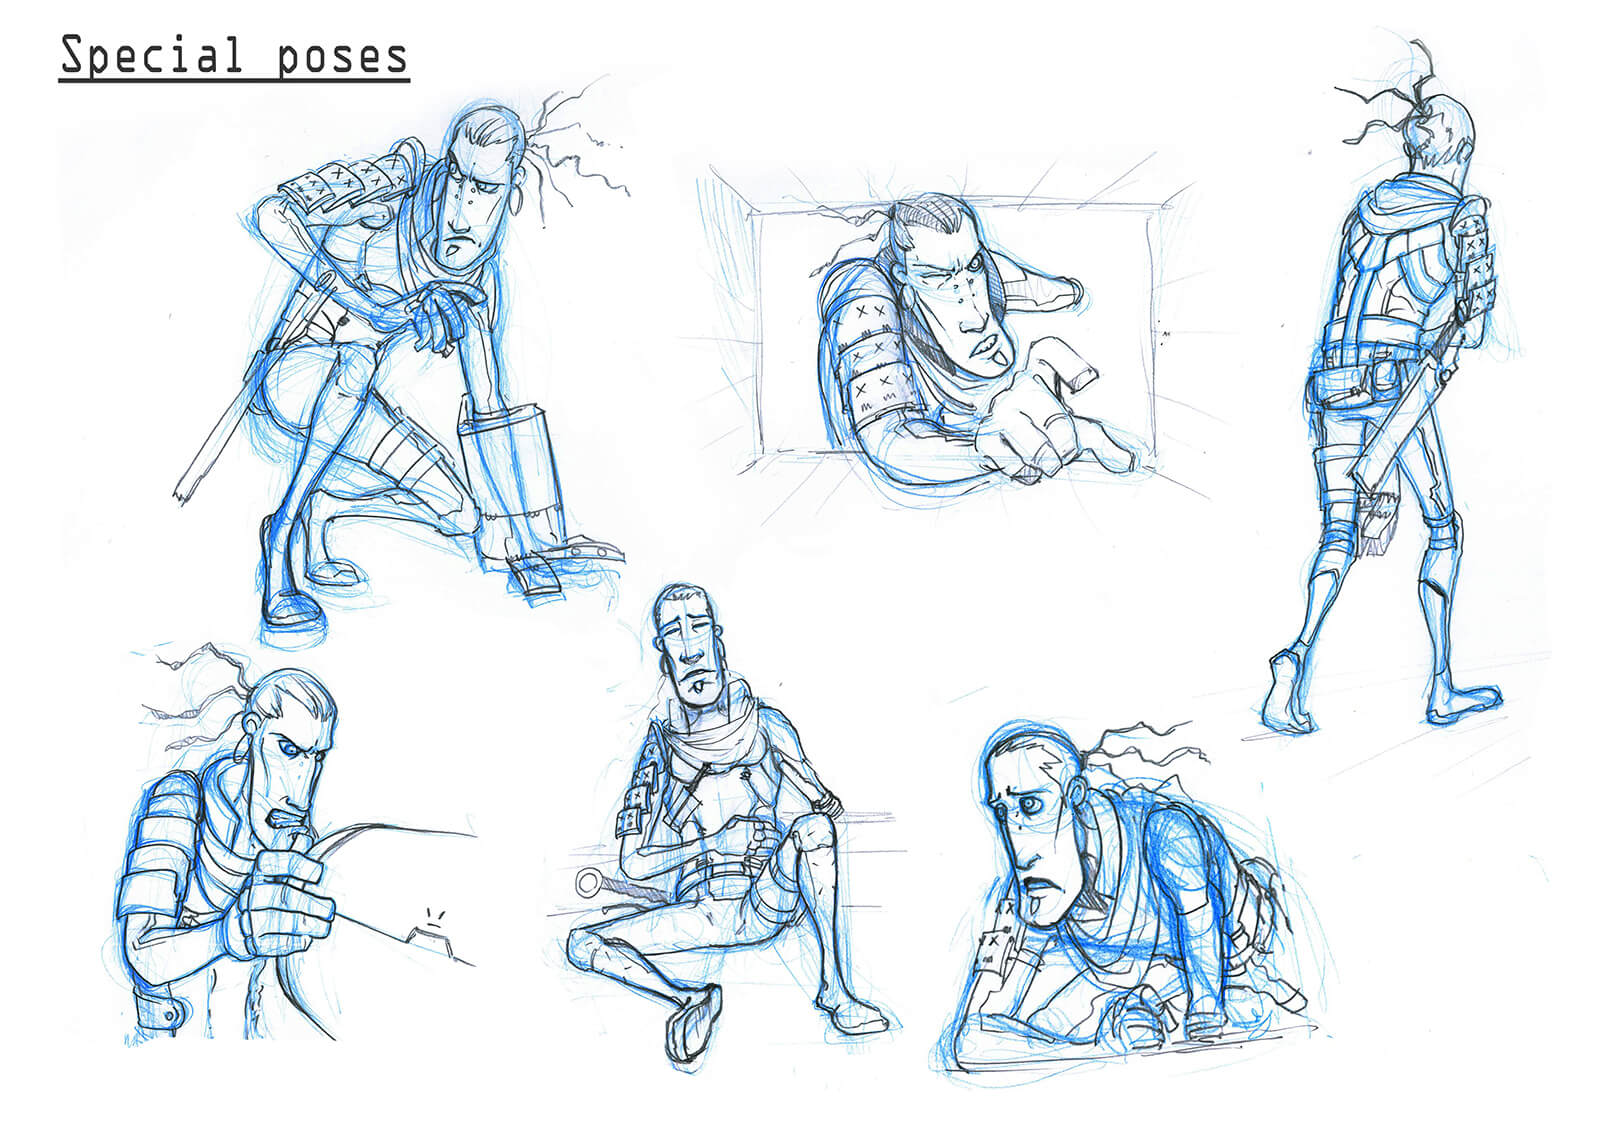 Blue and black sketches of a tall, thin man in body armor crouching, crawling, and sitting, among other poses